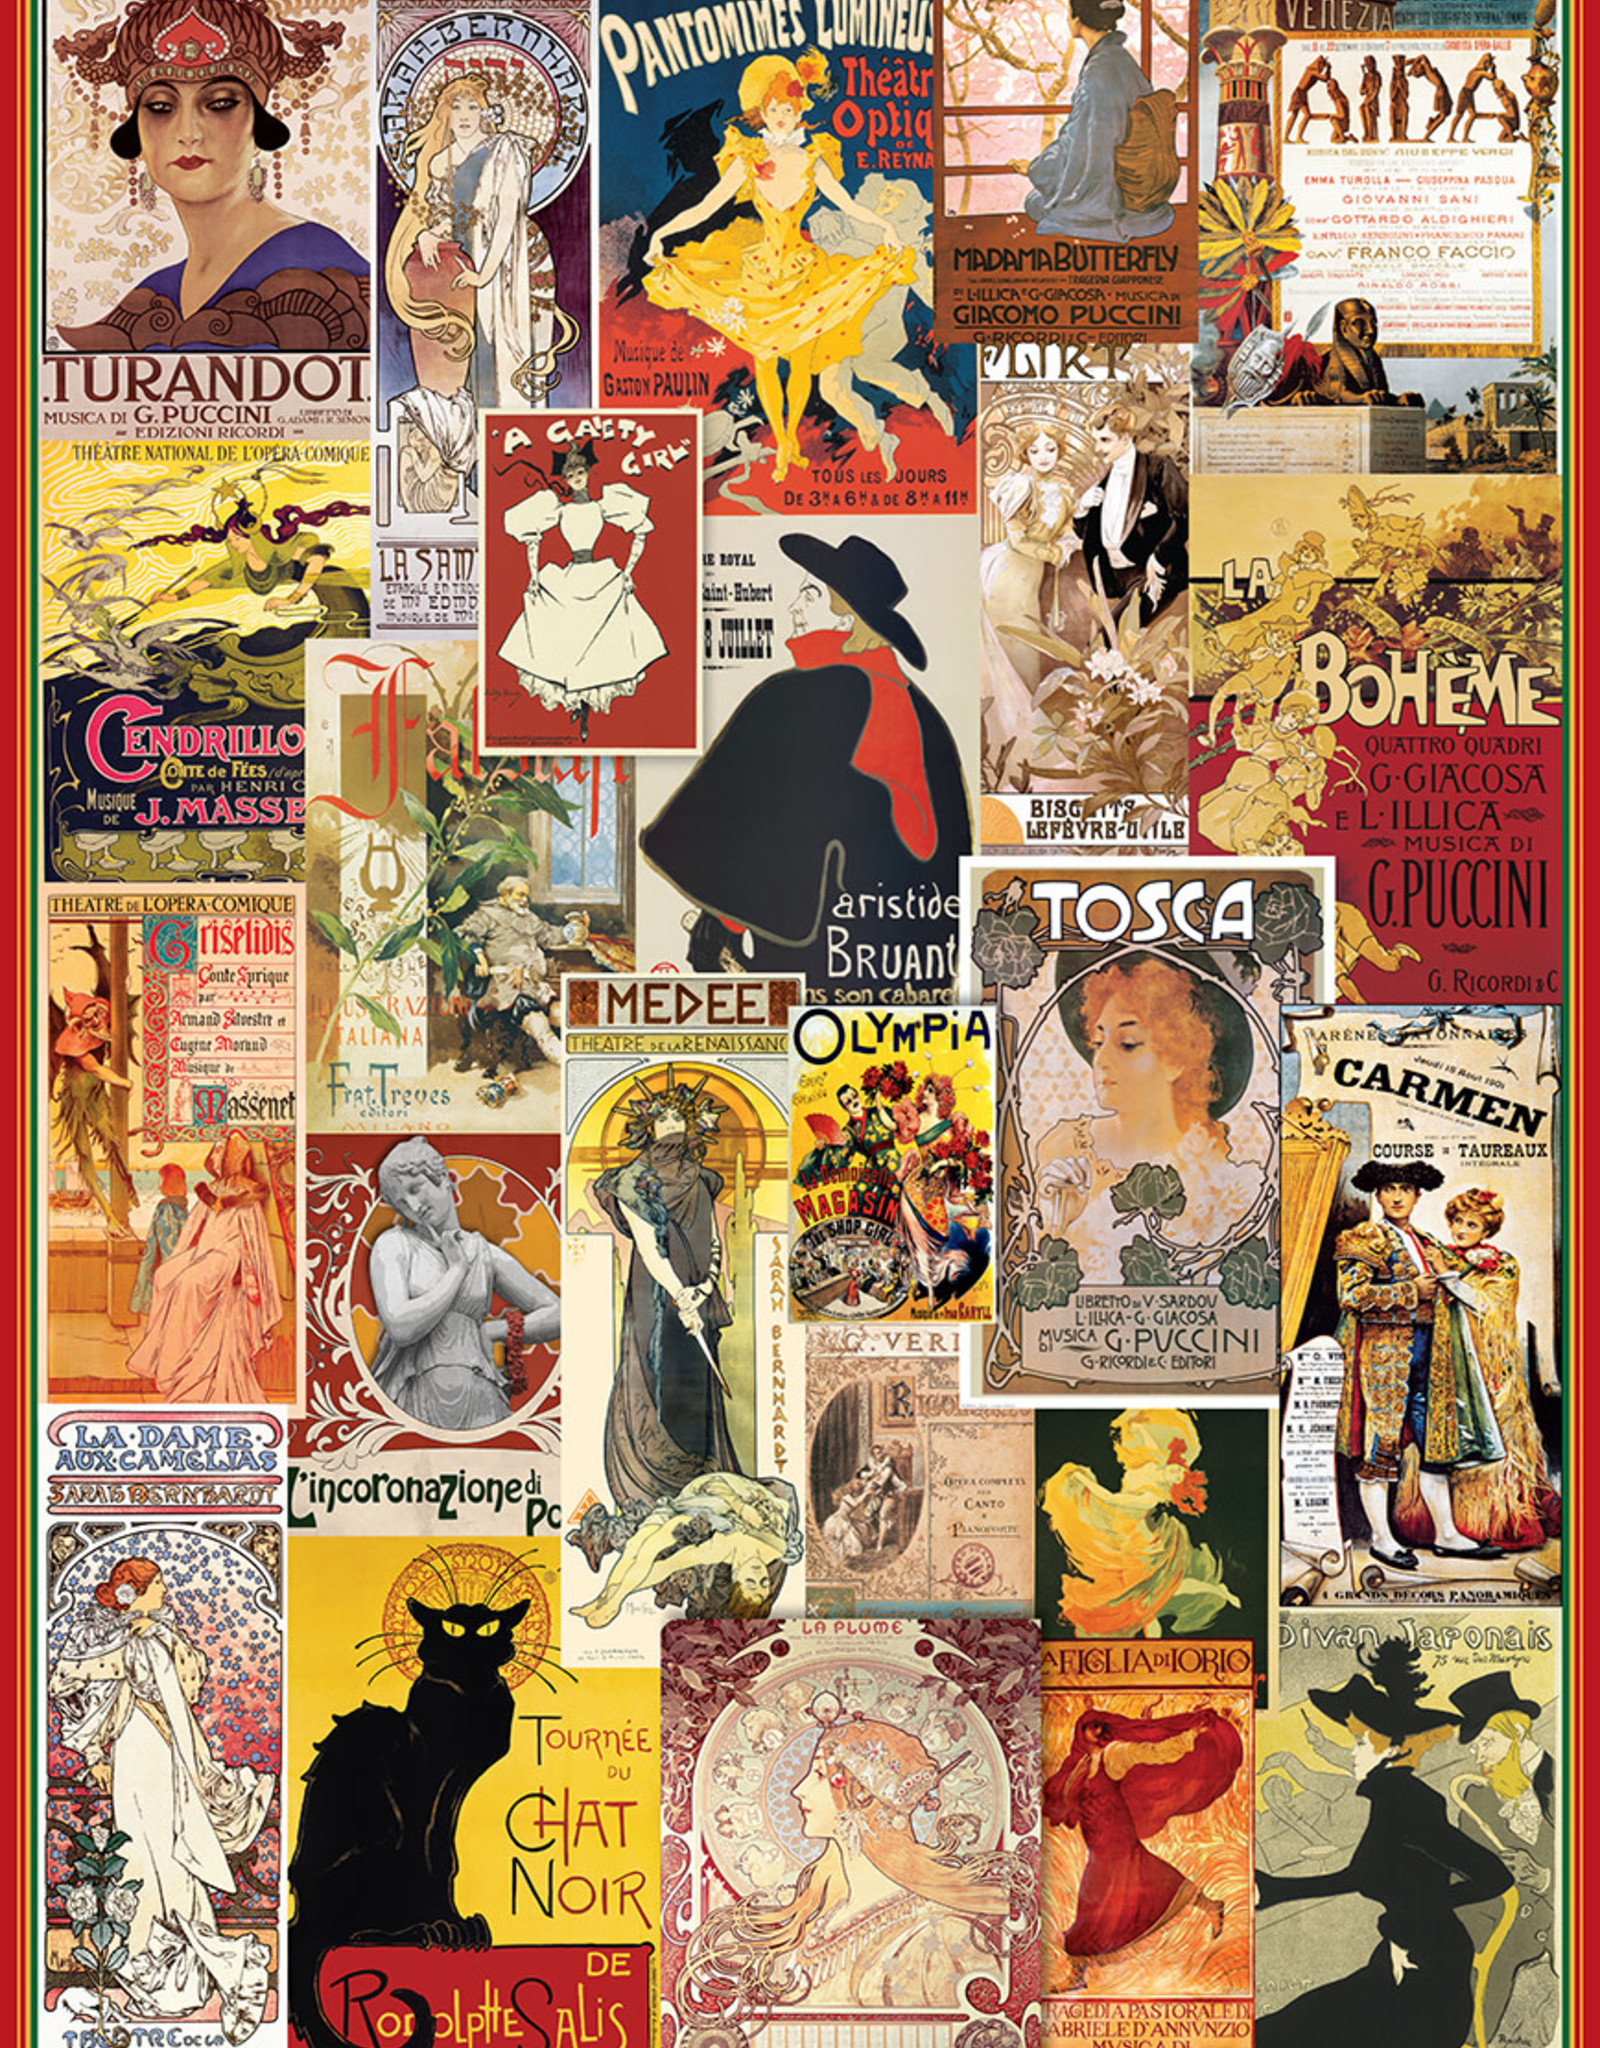 Eurographics Theater & Opera Vintage Posters  Puzzle 1000 PCS